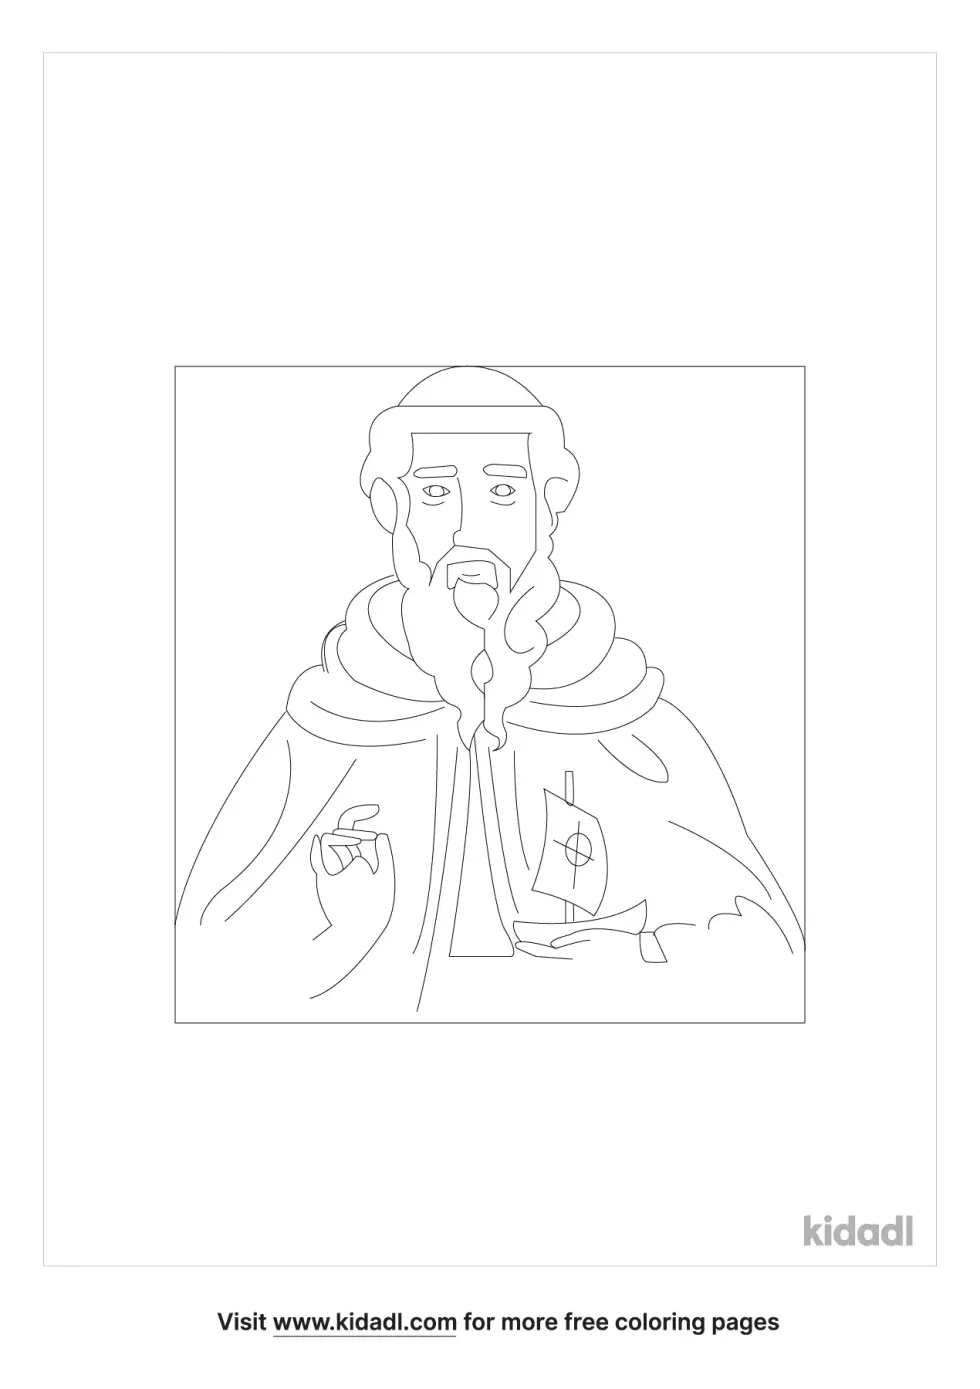 St Brendan Coloring Page